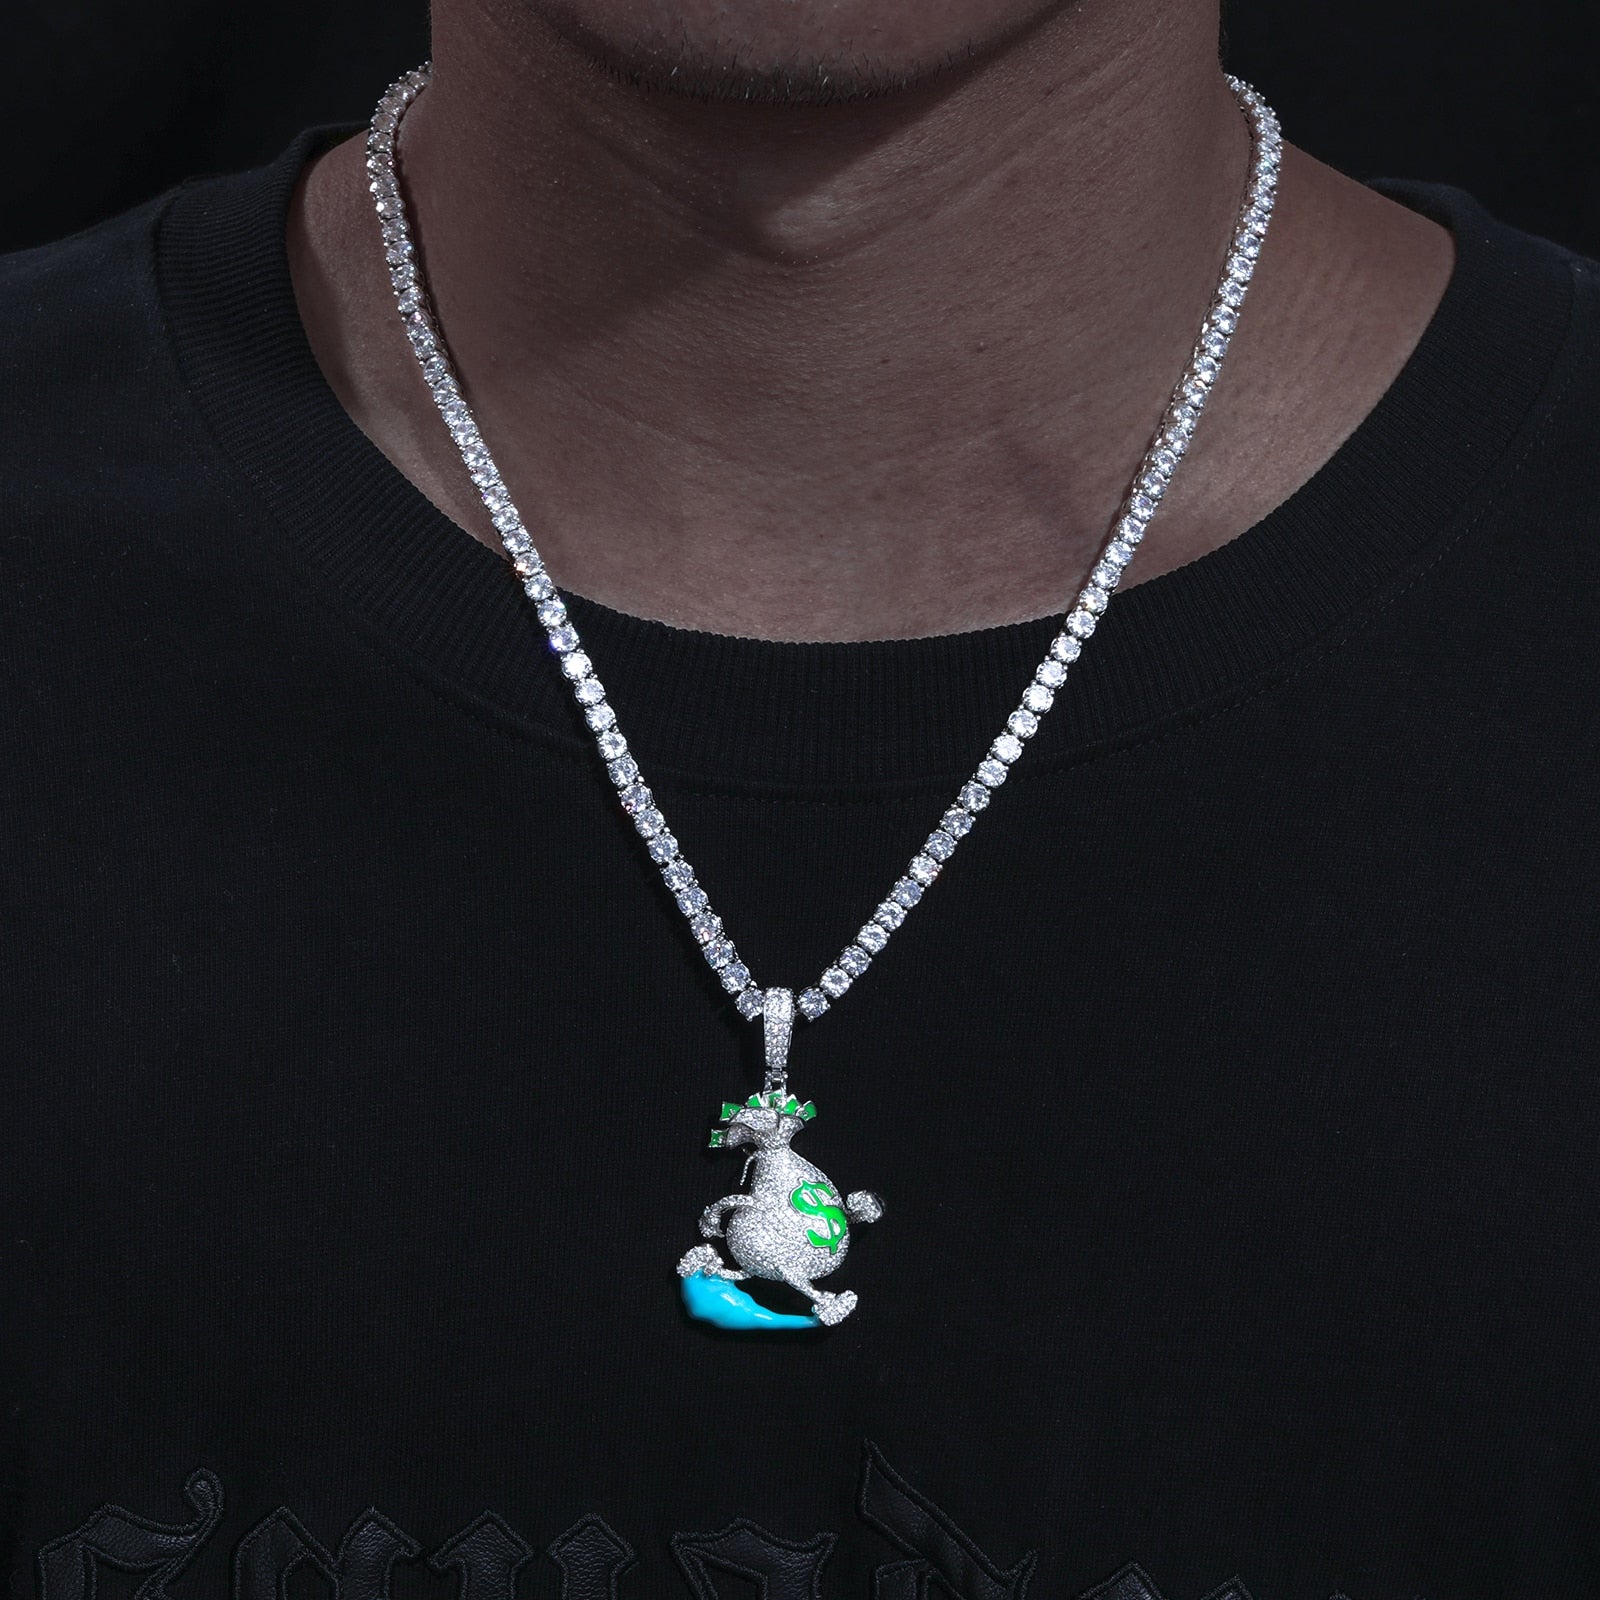 Real Rapper Jewelry | Real Hip Hop Jewelry